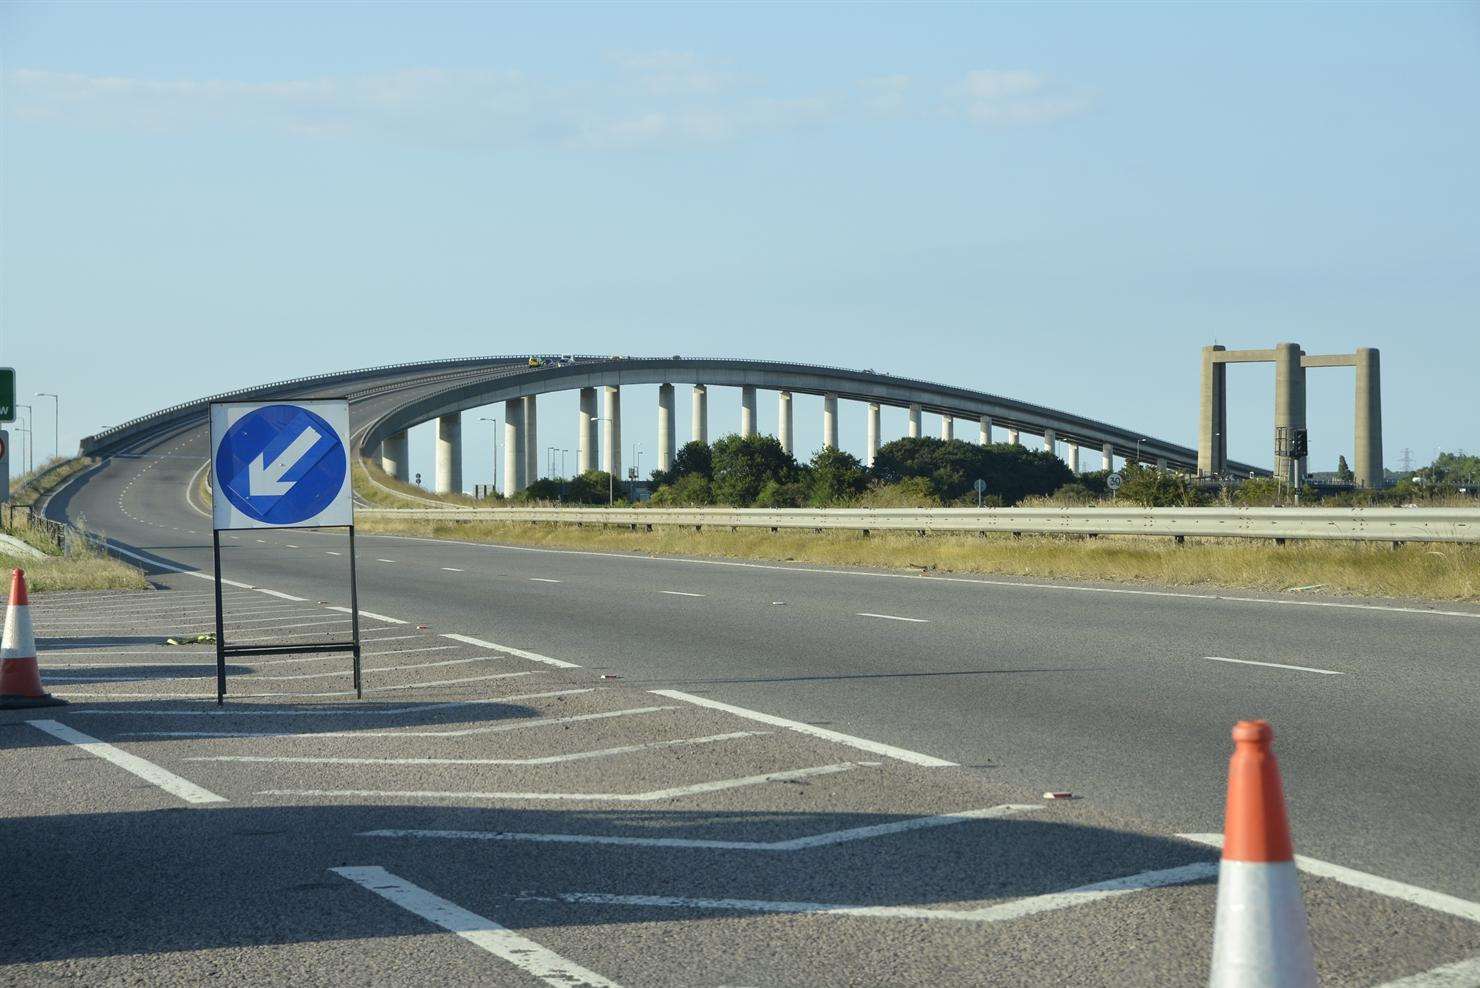 The Sheppey Crossing will be closed from Friday evening